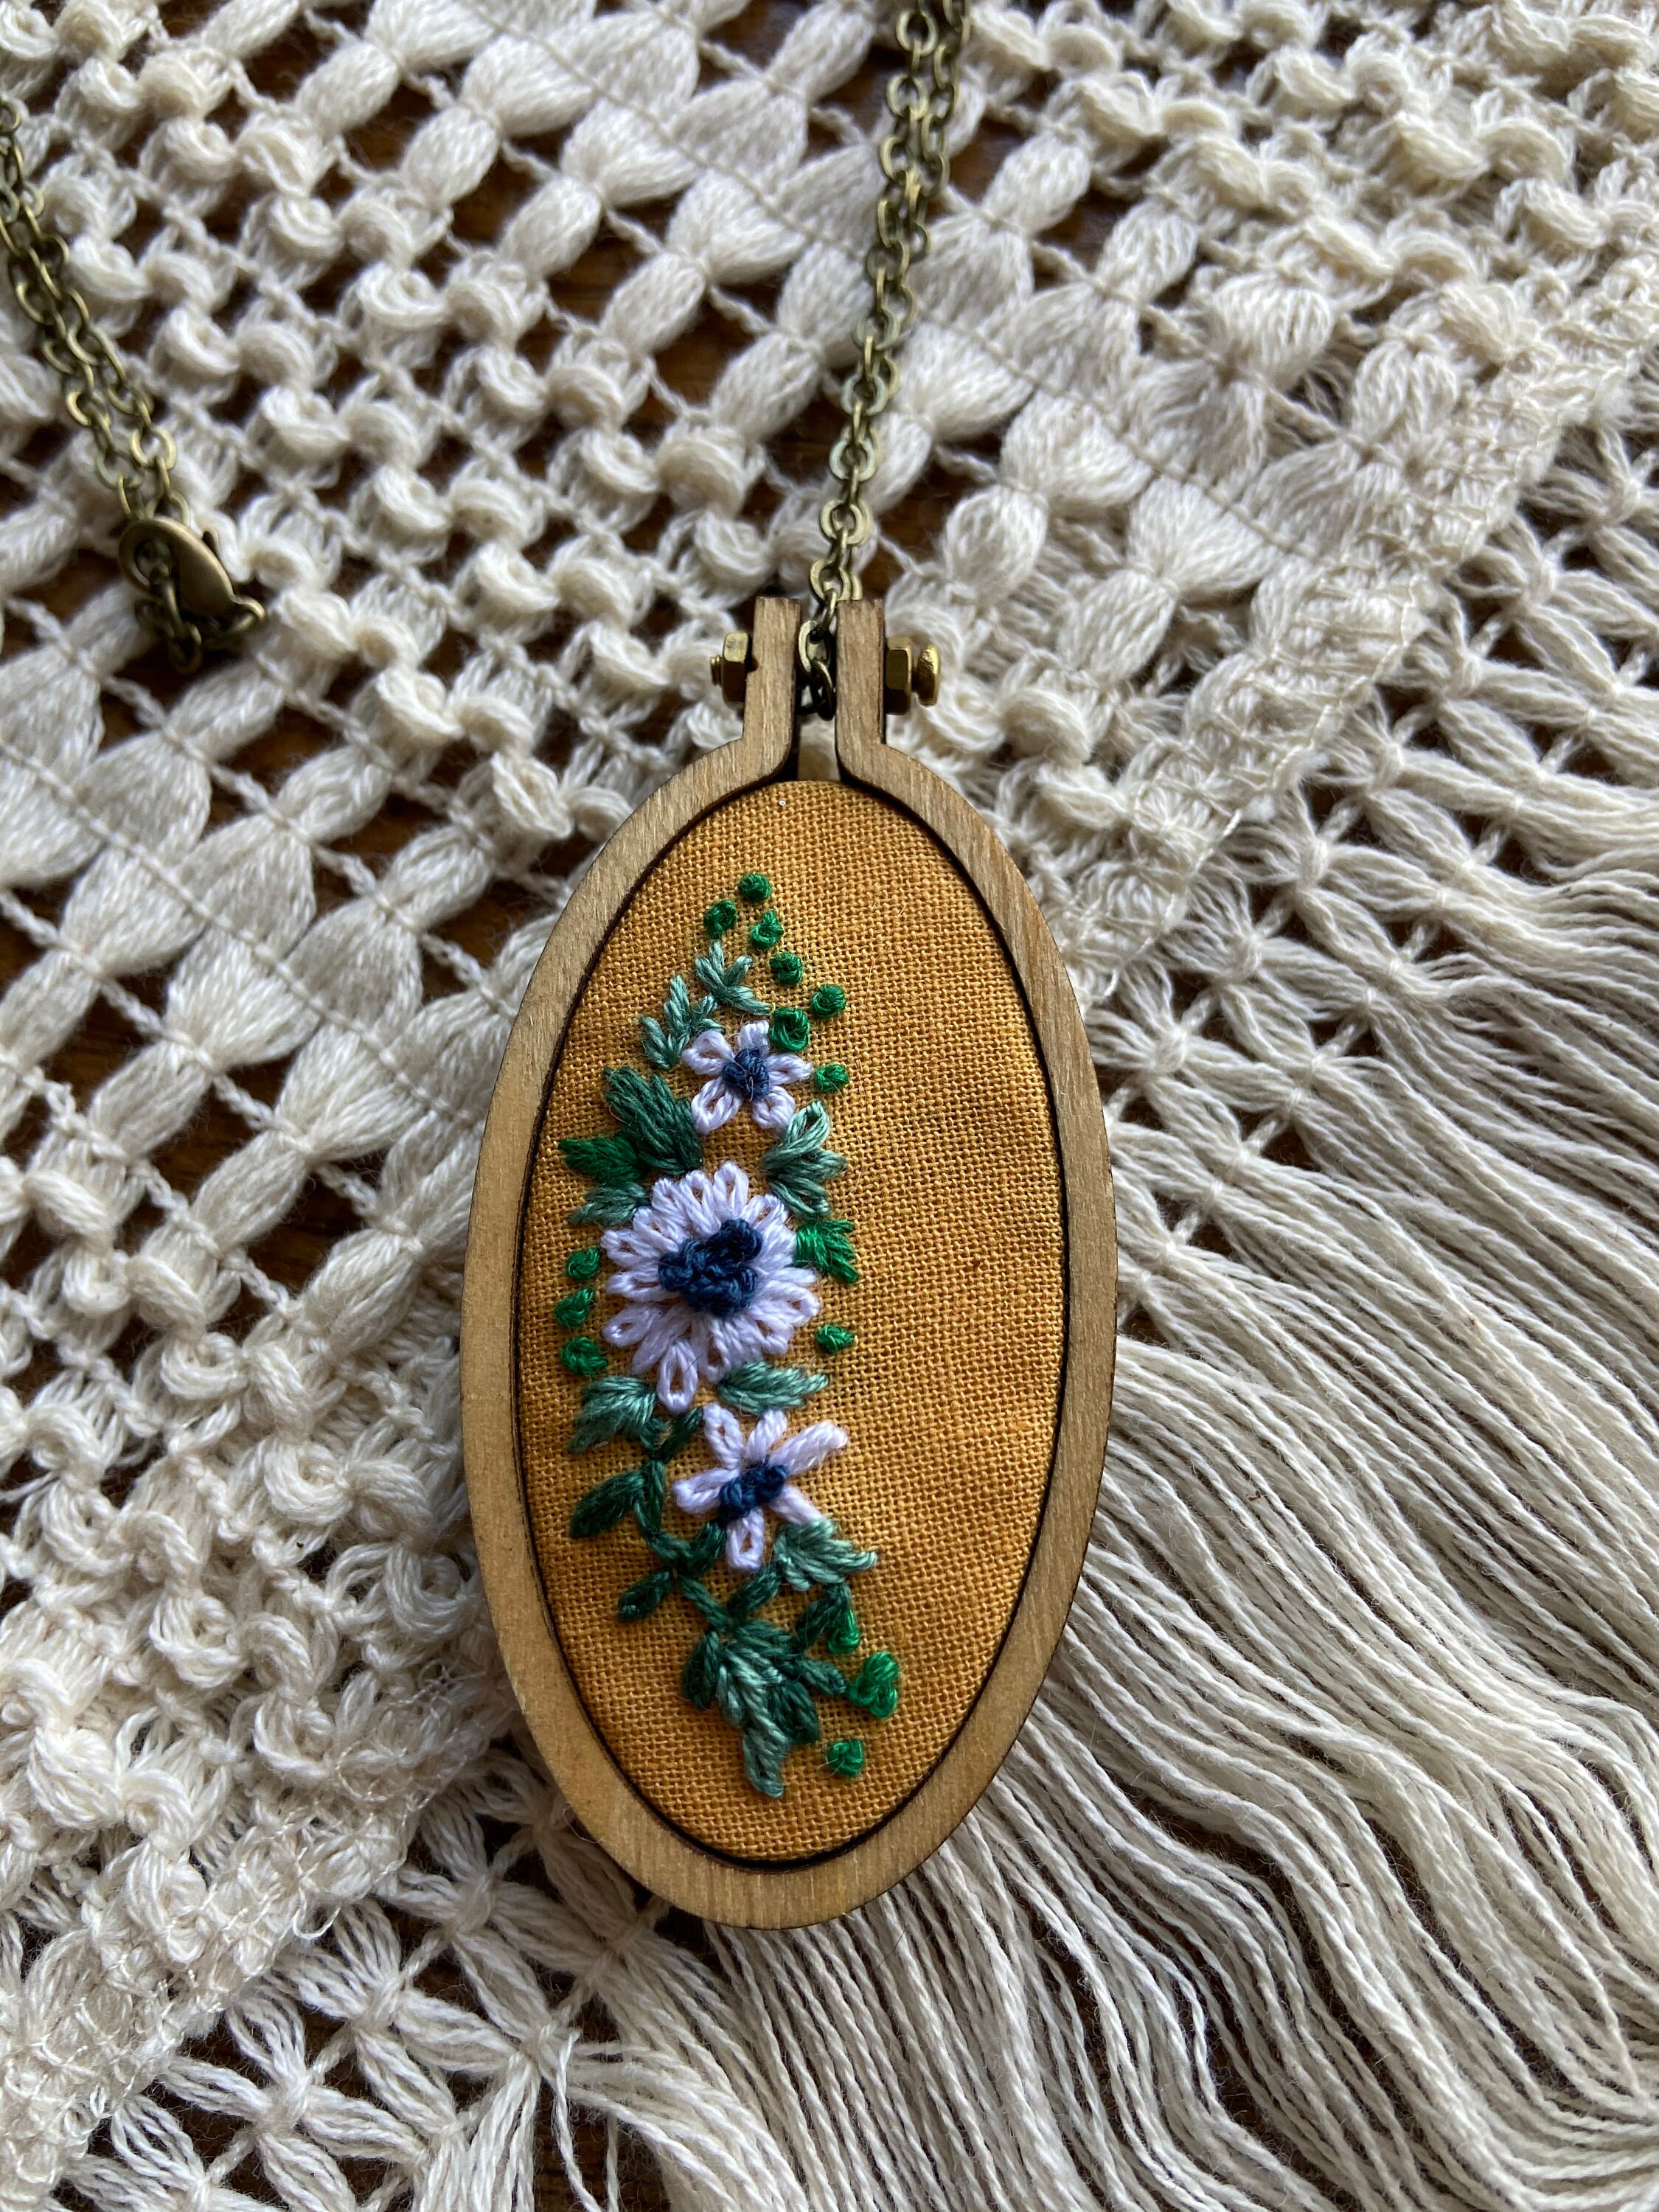 Handmade Embroidered Necklace, Embroidered Pendants, Floral Necklaces,  Handmade Pendants, Embroidered Jewelry, Embroidery Accessories 